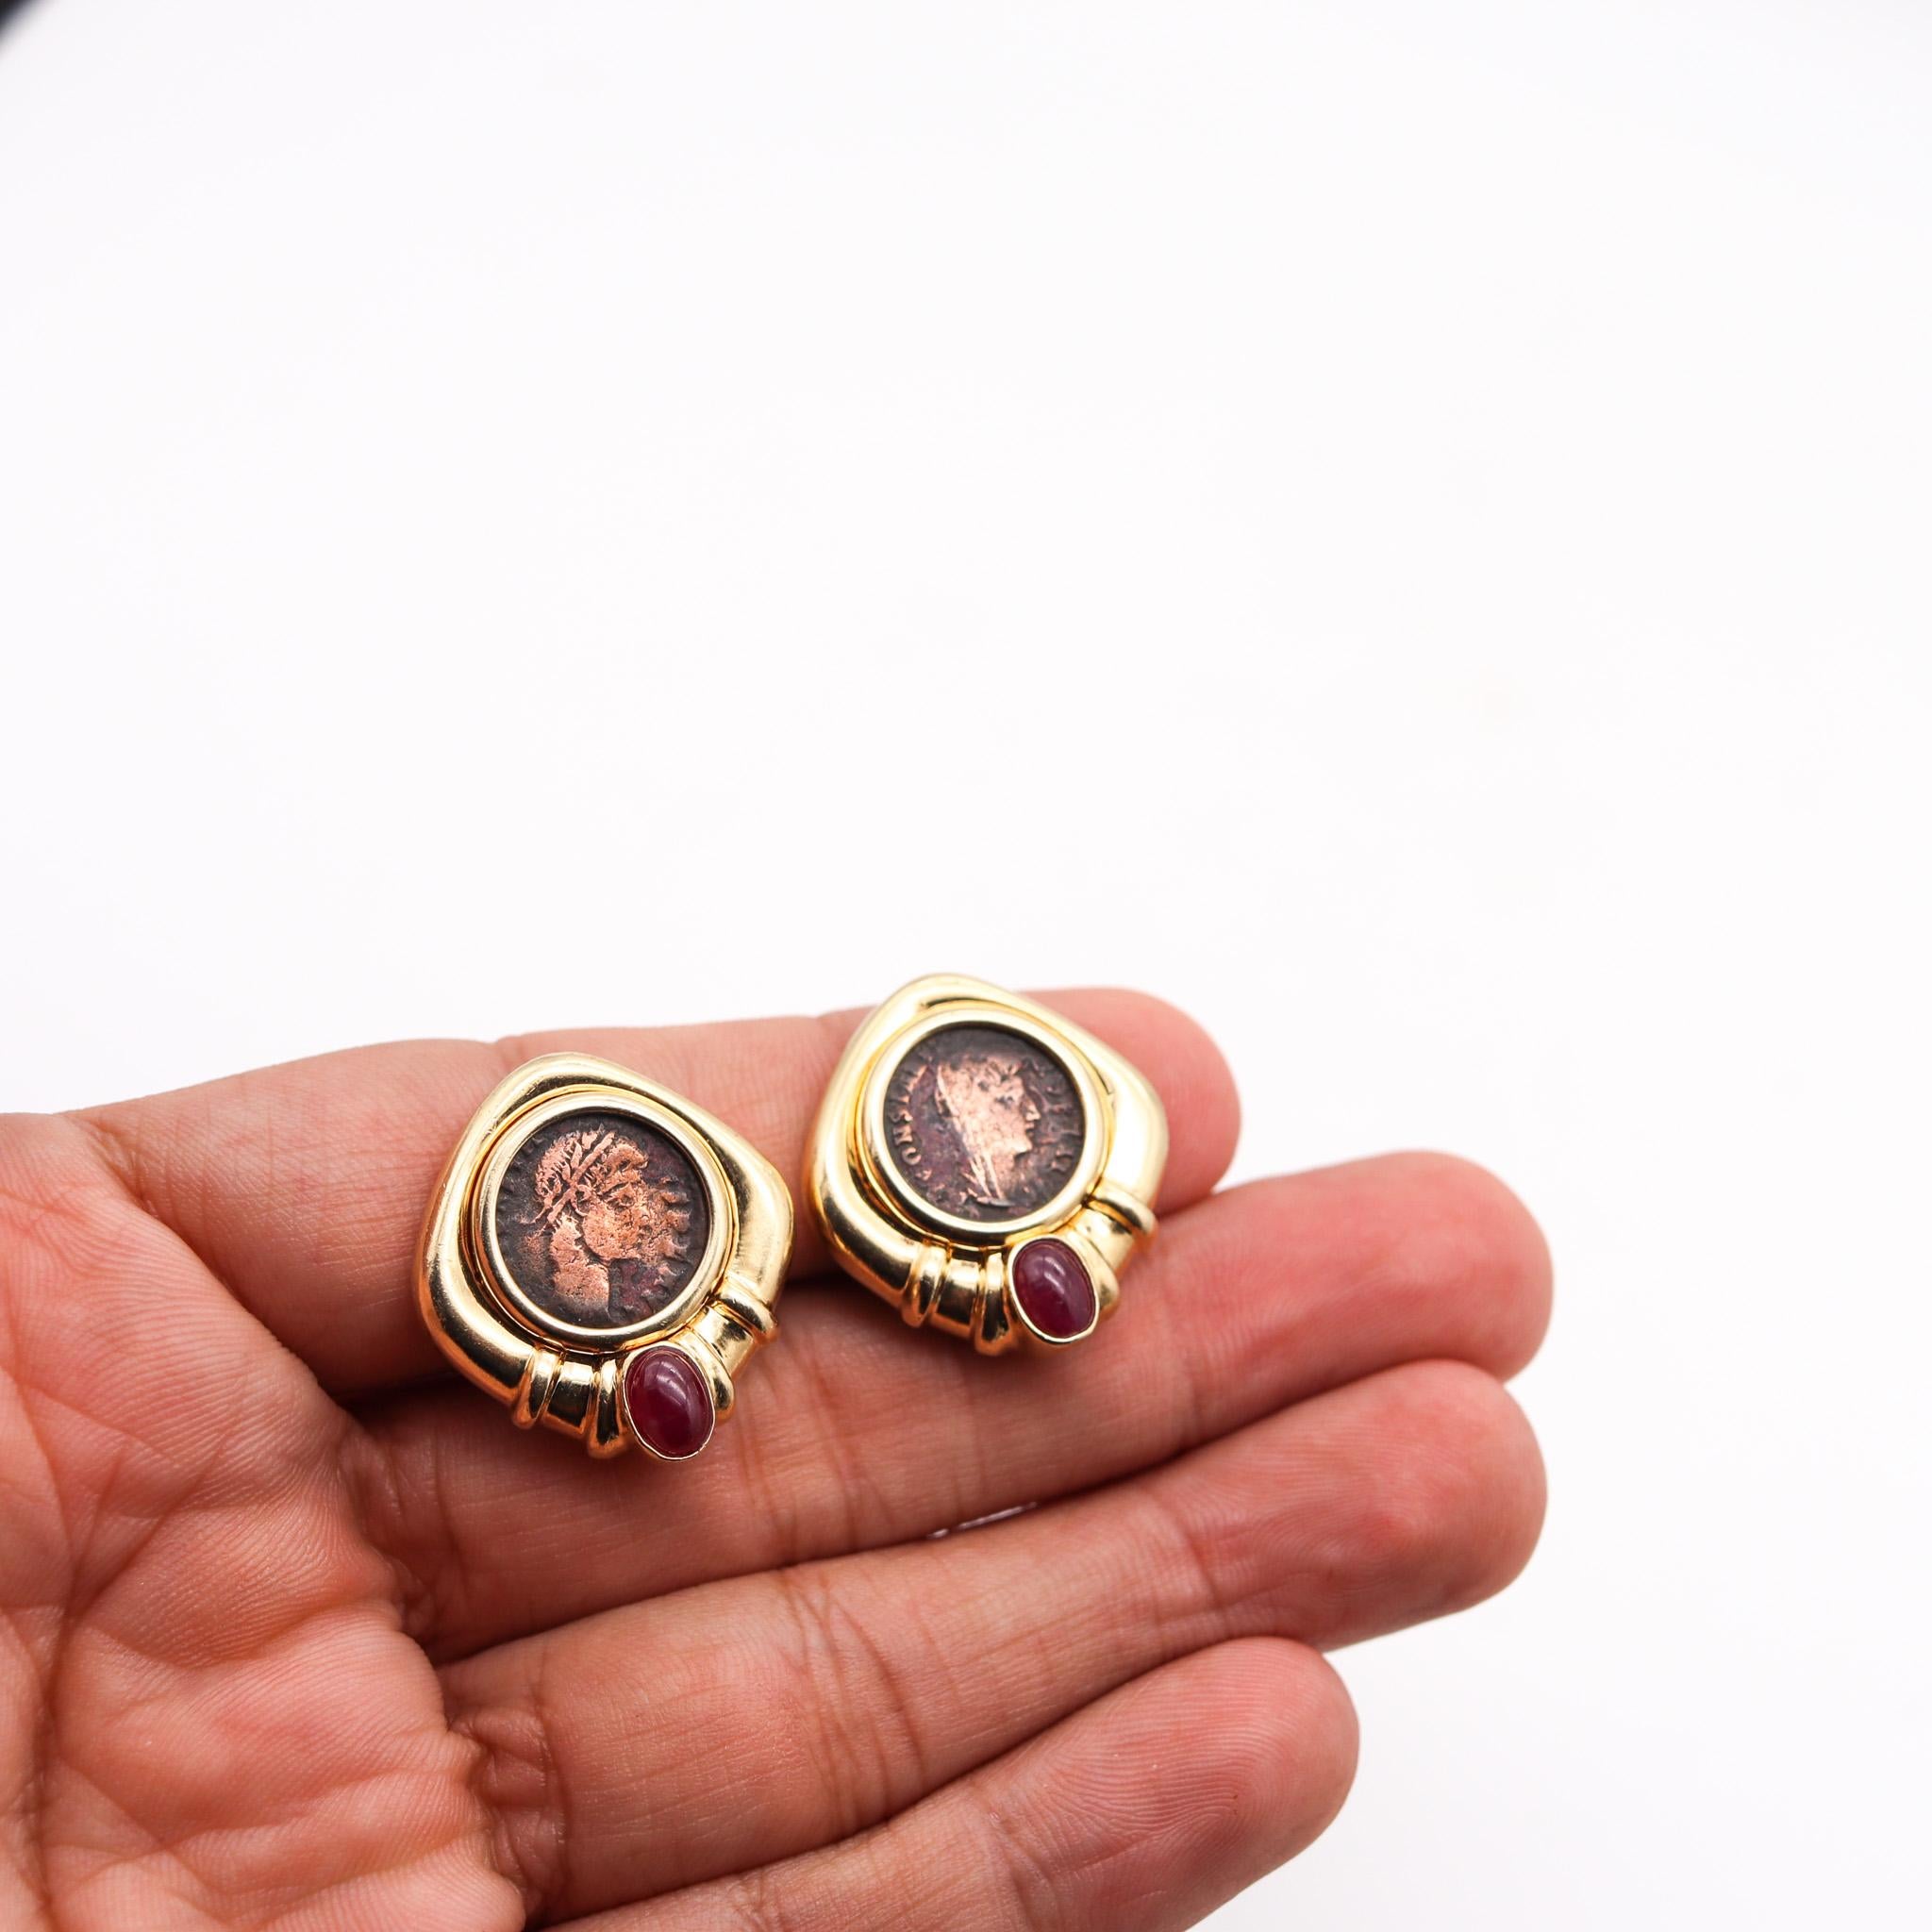 Cabochon Constantine The Great 307 AD Coins Earrings in 14kt Yellow Gold with Rubies For Sale